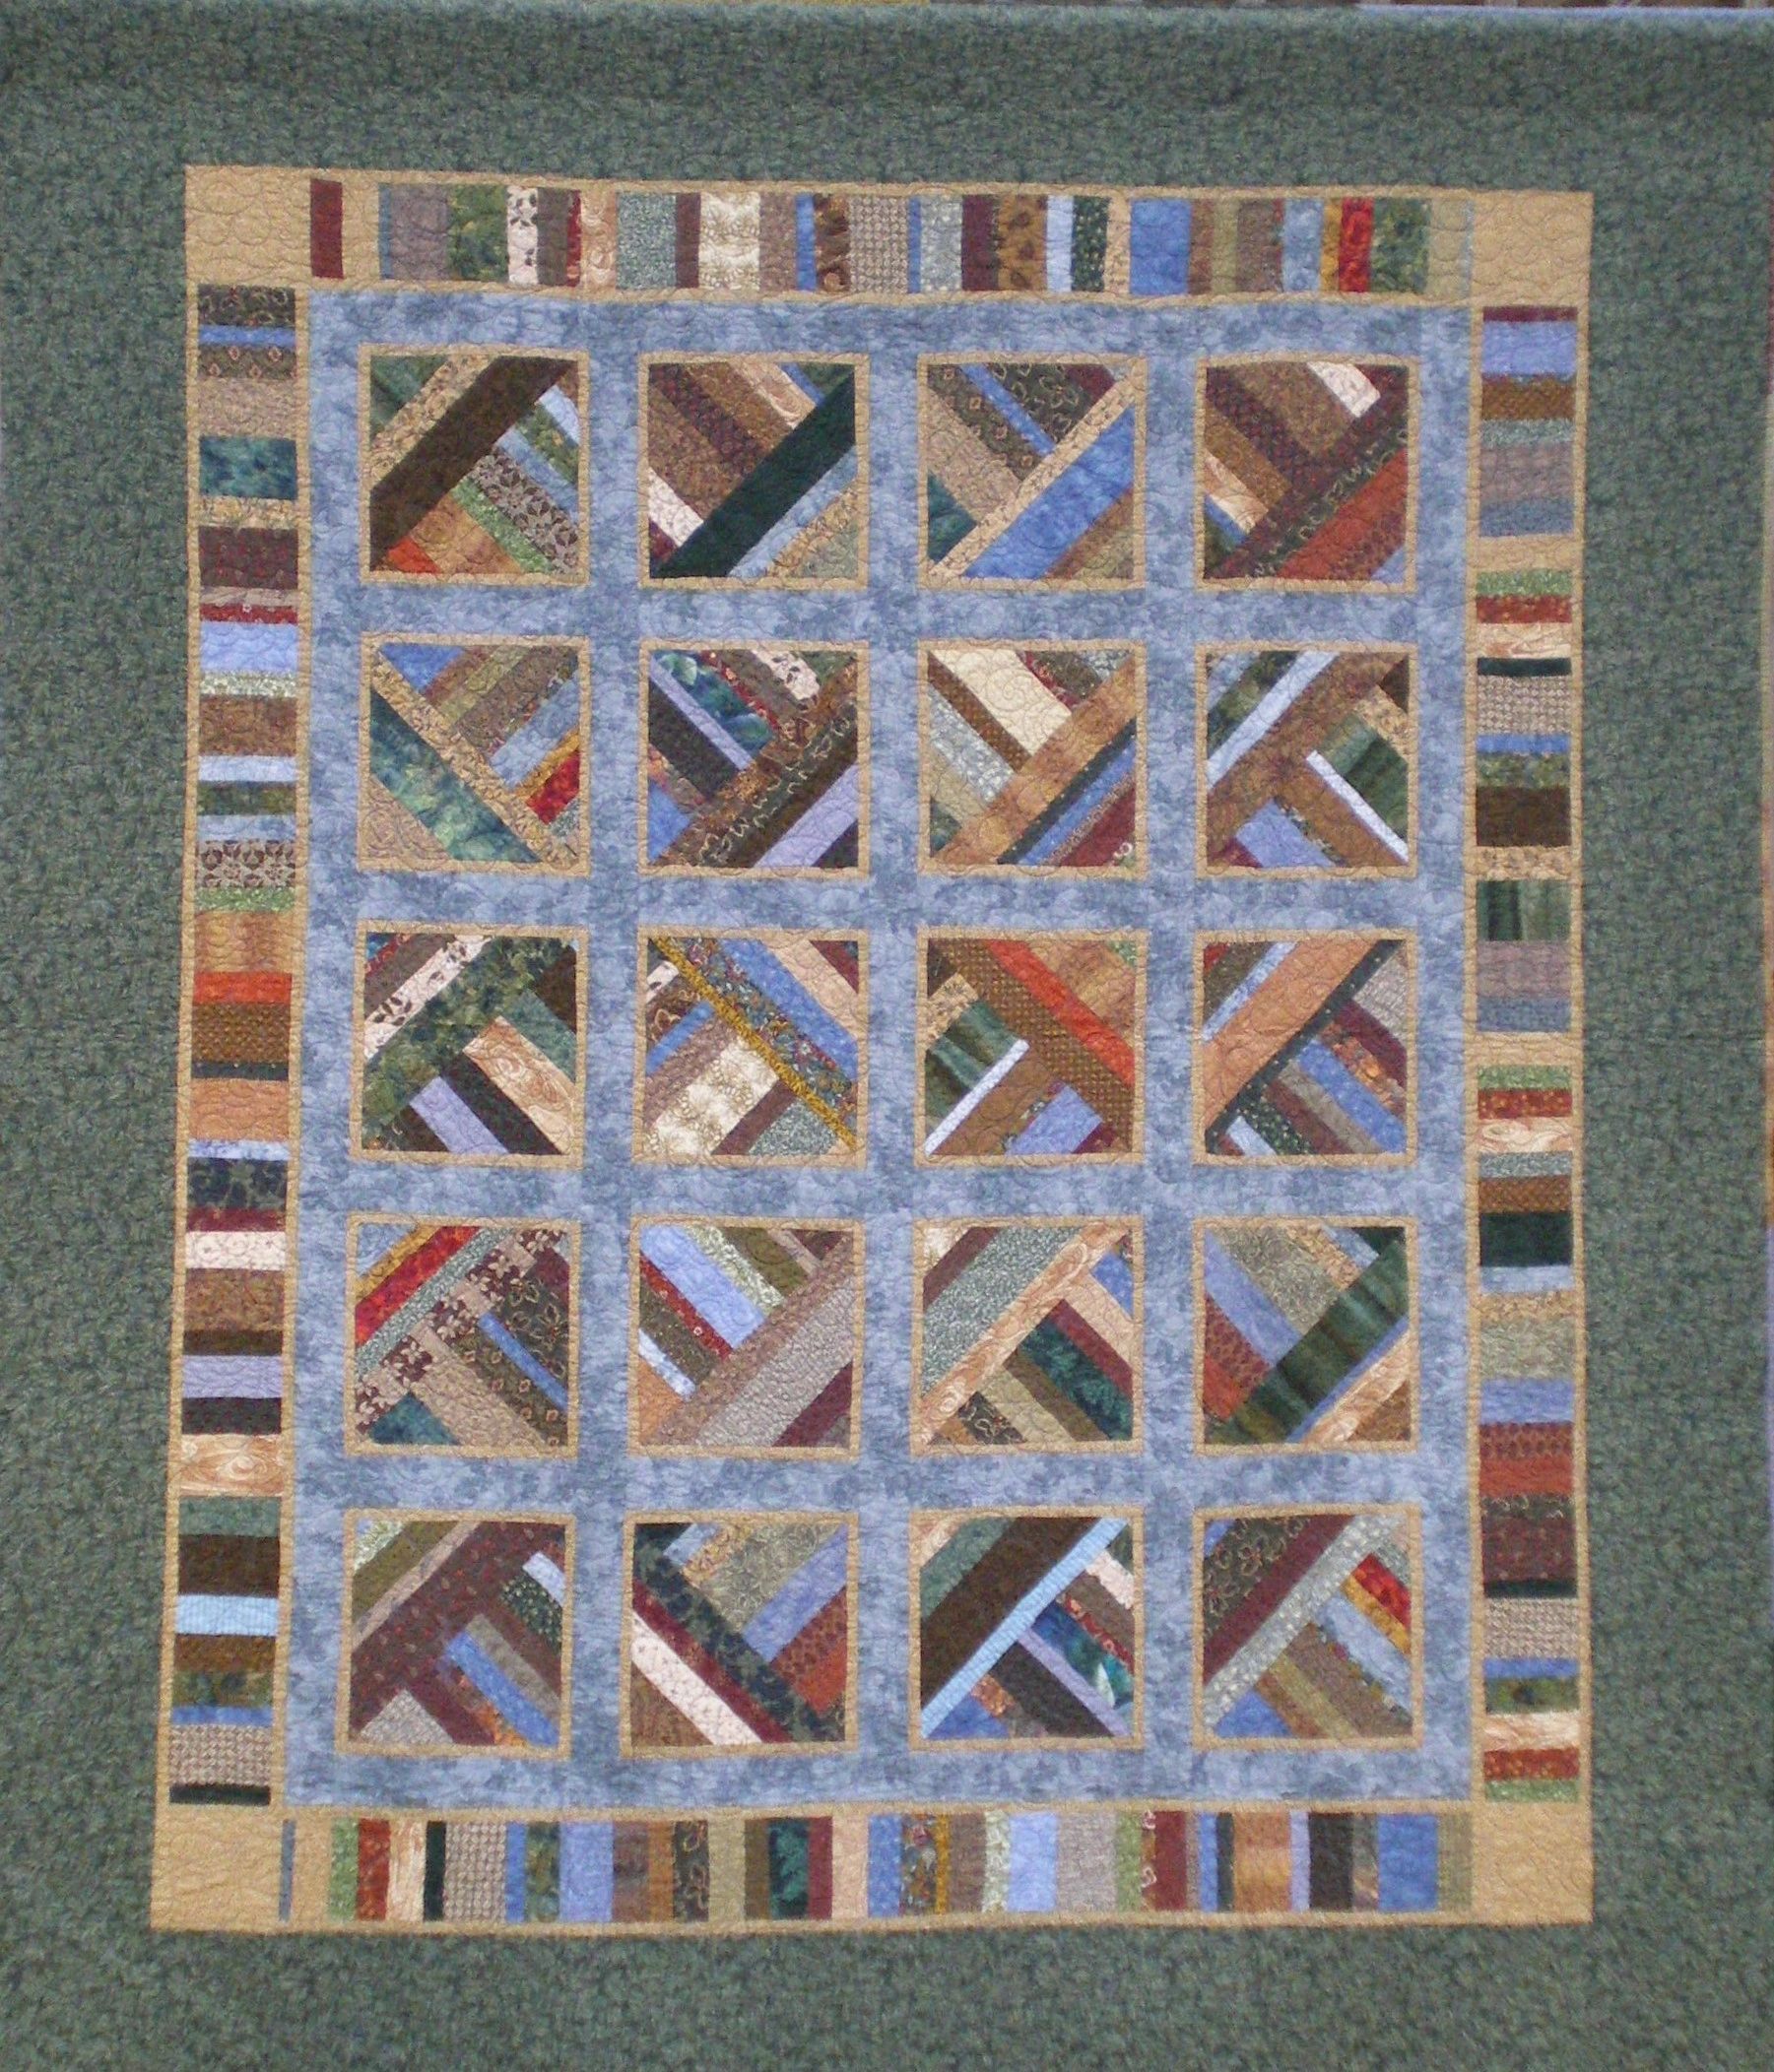 Southern Winter, a hard copy strip pieced pattern by Quilt Designs by Candace in traditional prints